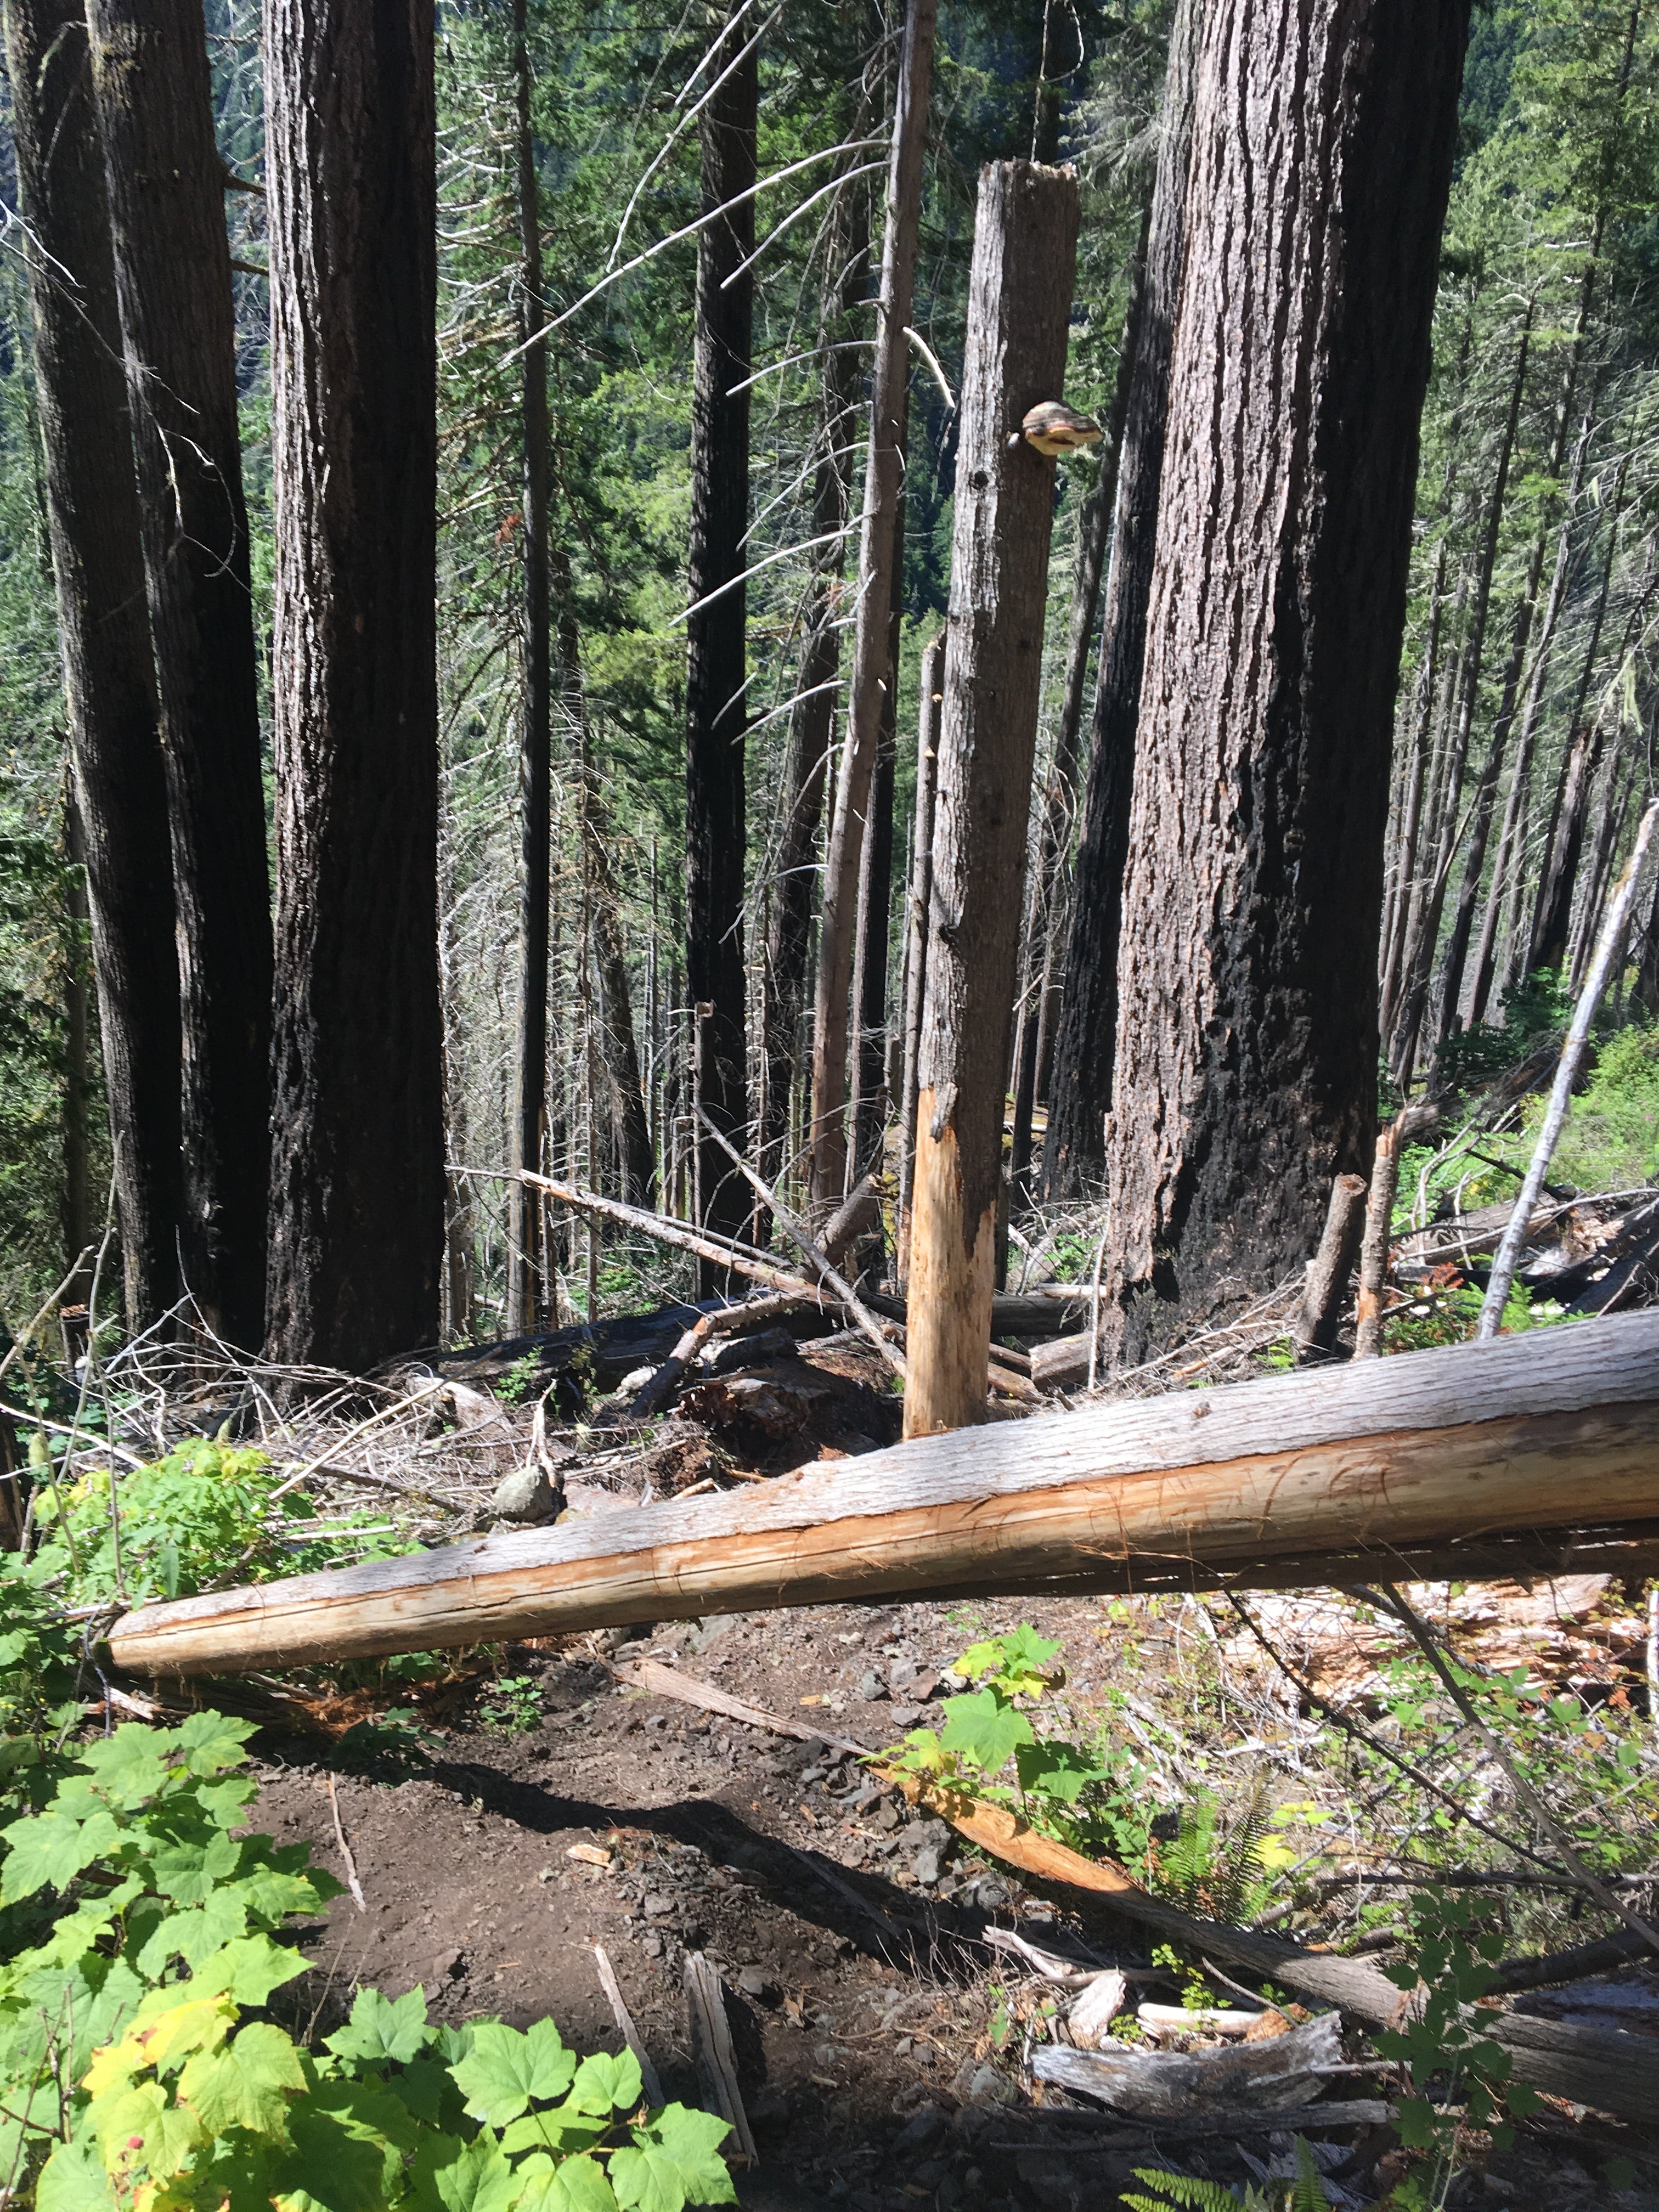 Lots of downed trees on lower section of trail